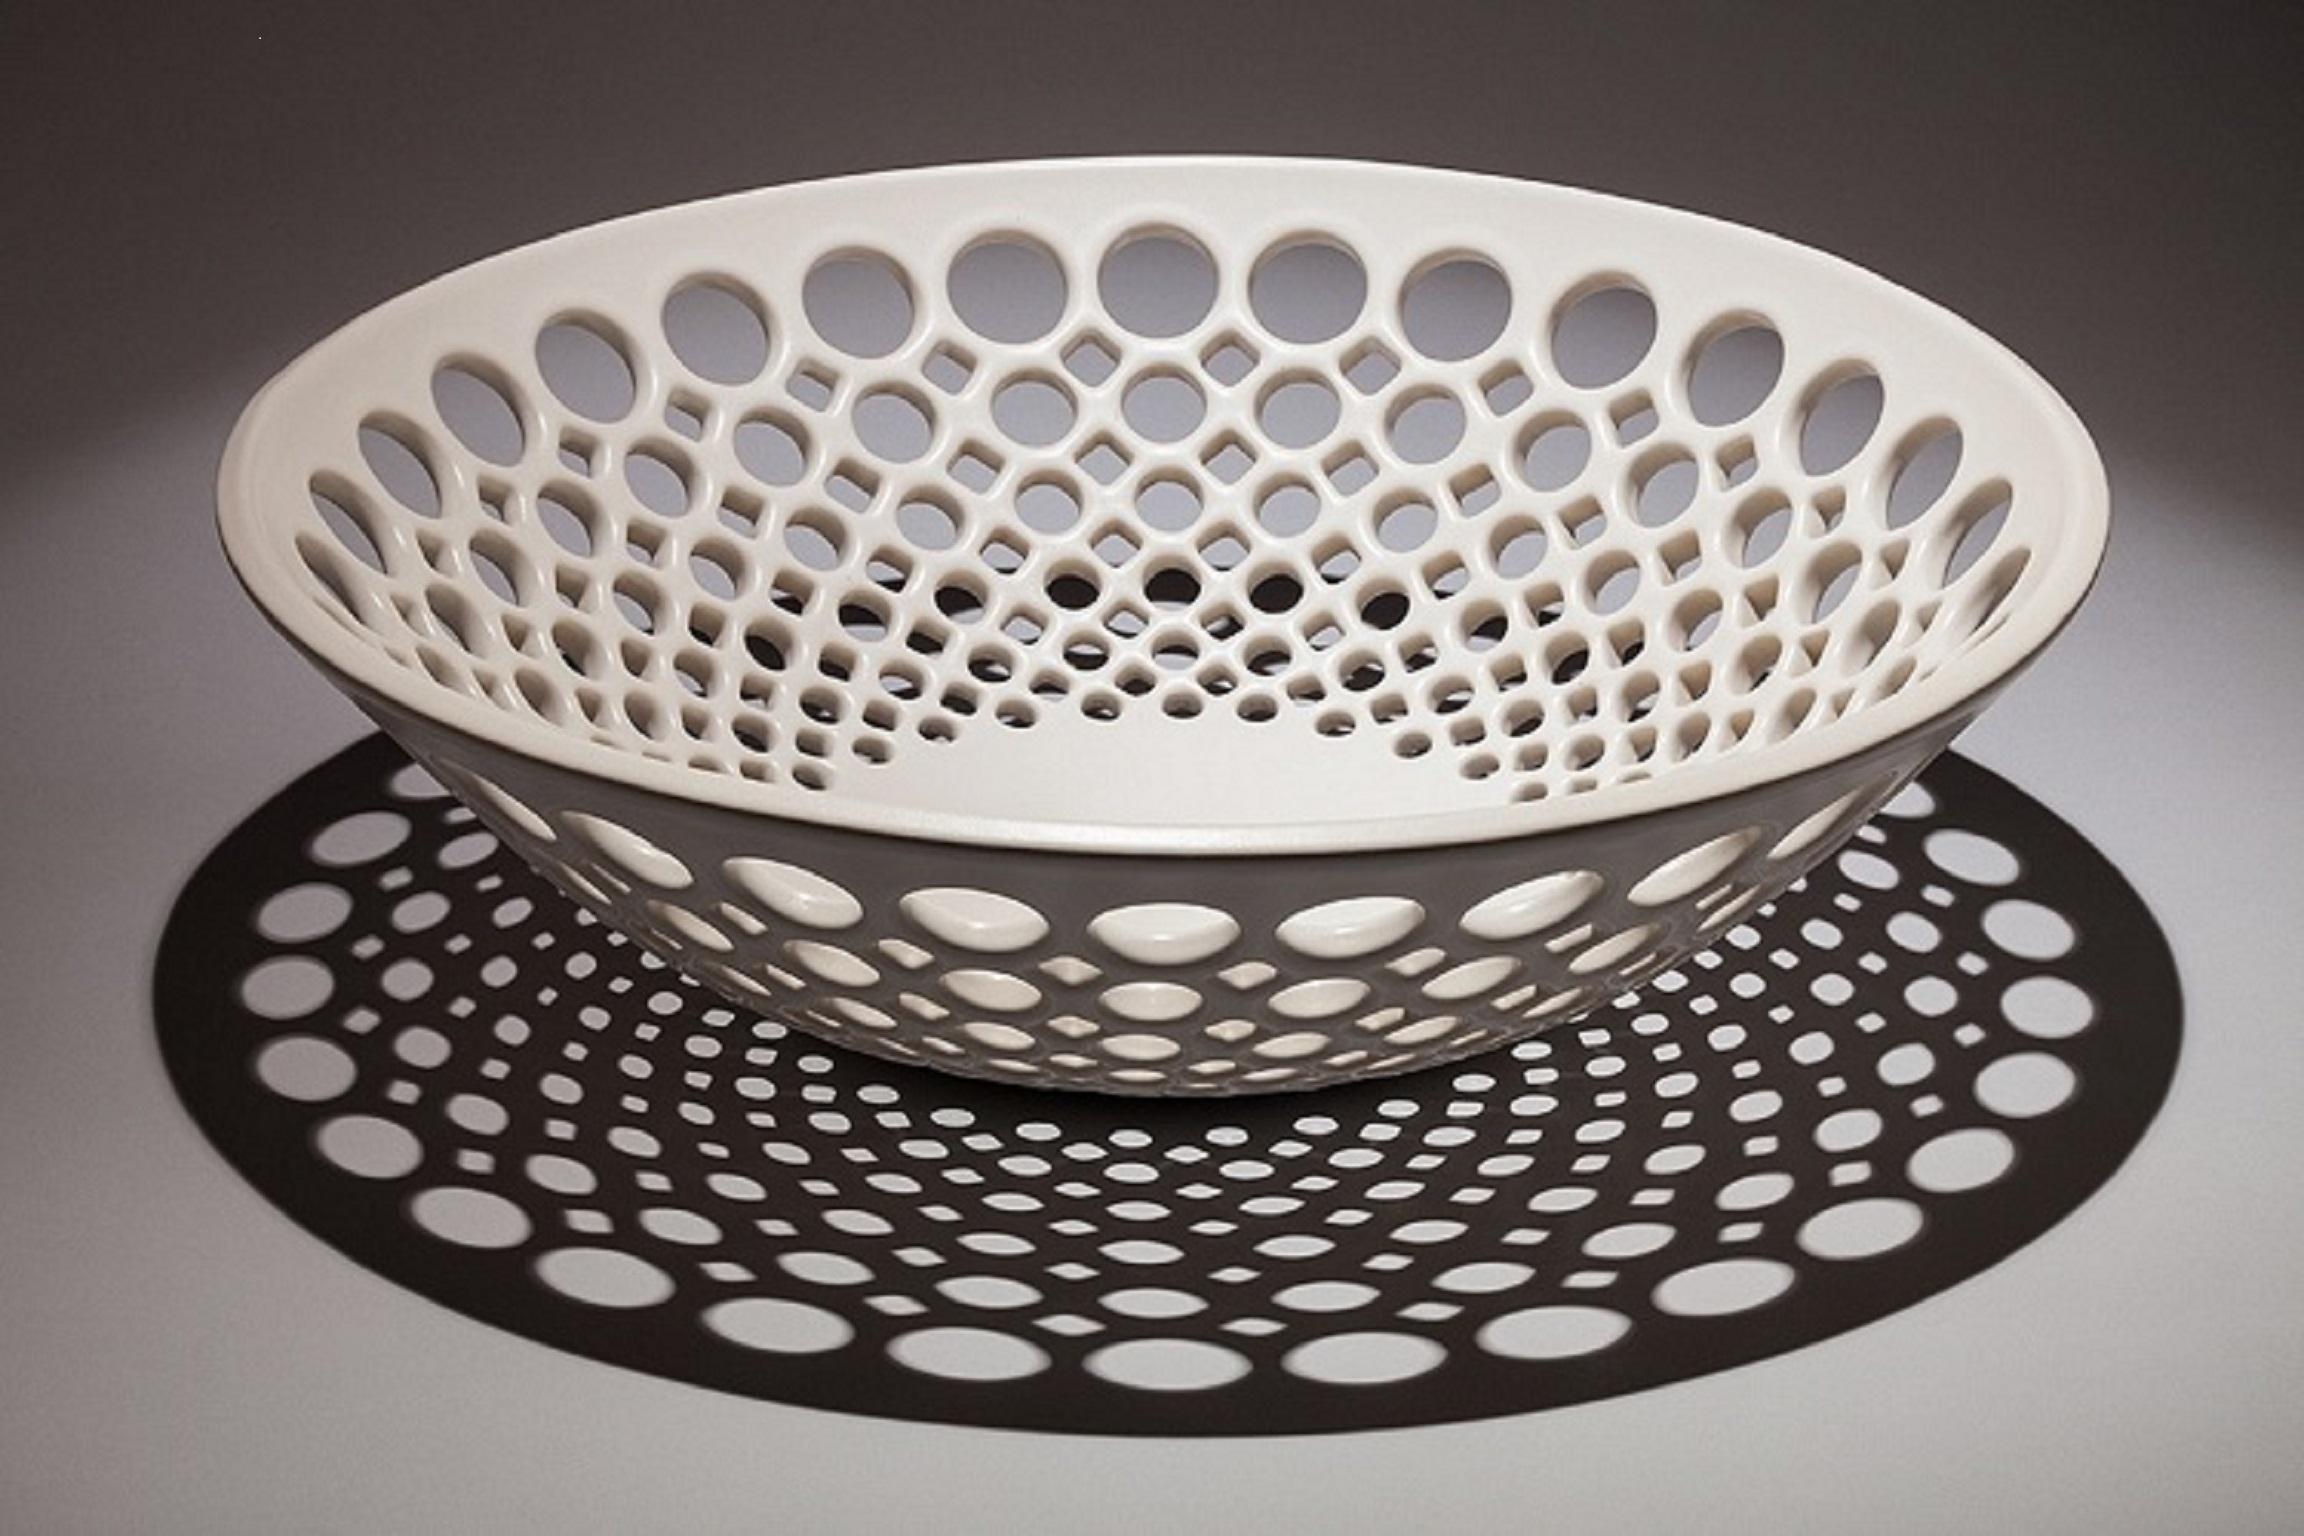 Inspired by Mid-Century Modern design, the bowl is wheel thrown and hand pierced in white stoneware with a white satin glaze. Small holes are created when the clay is still wet and then each hole is painstakingly enlarged and smoothed when the clay